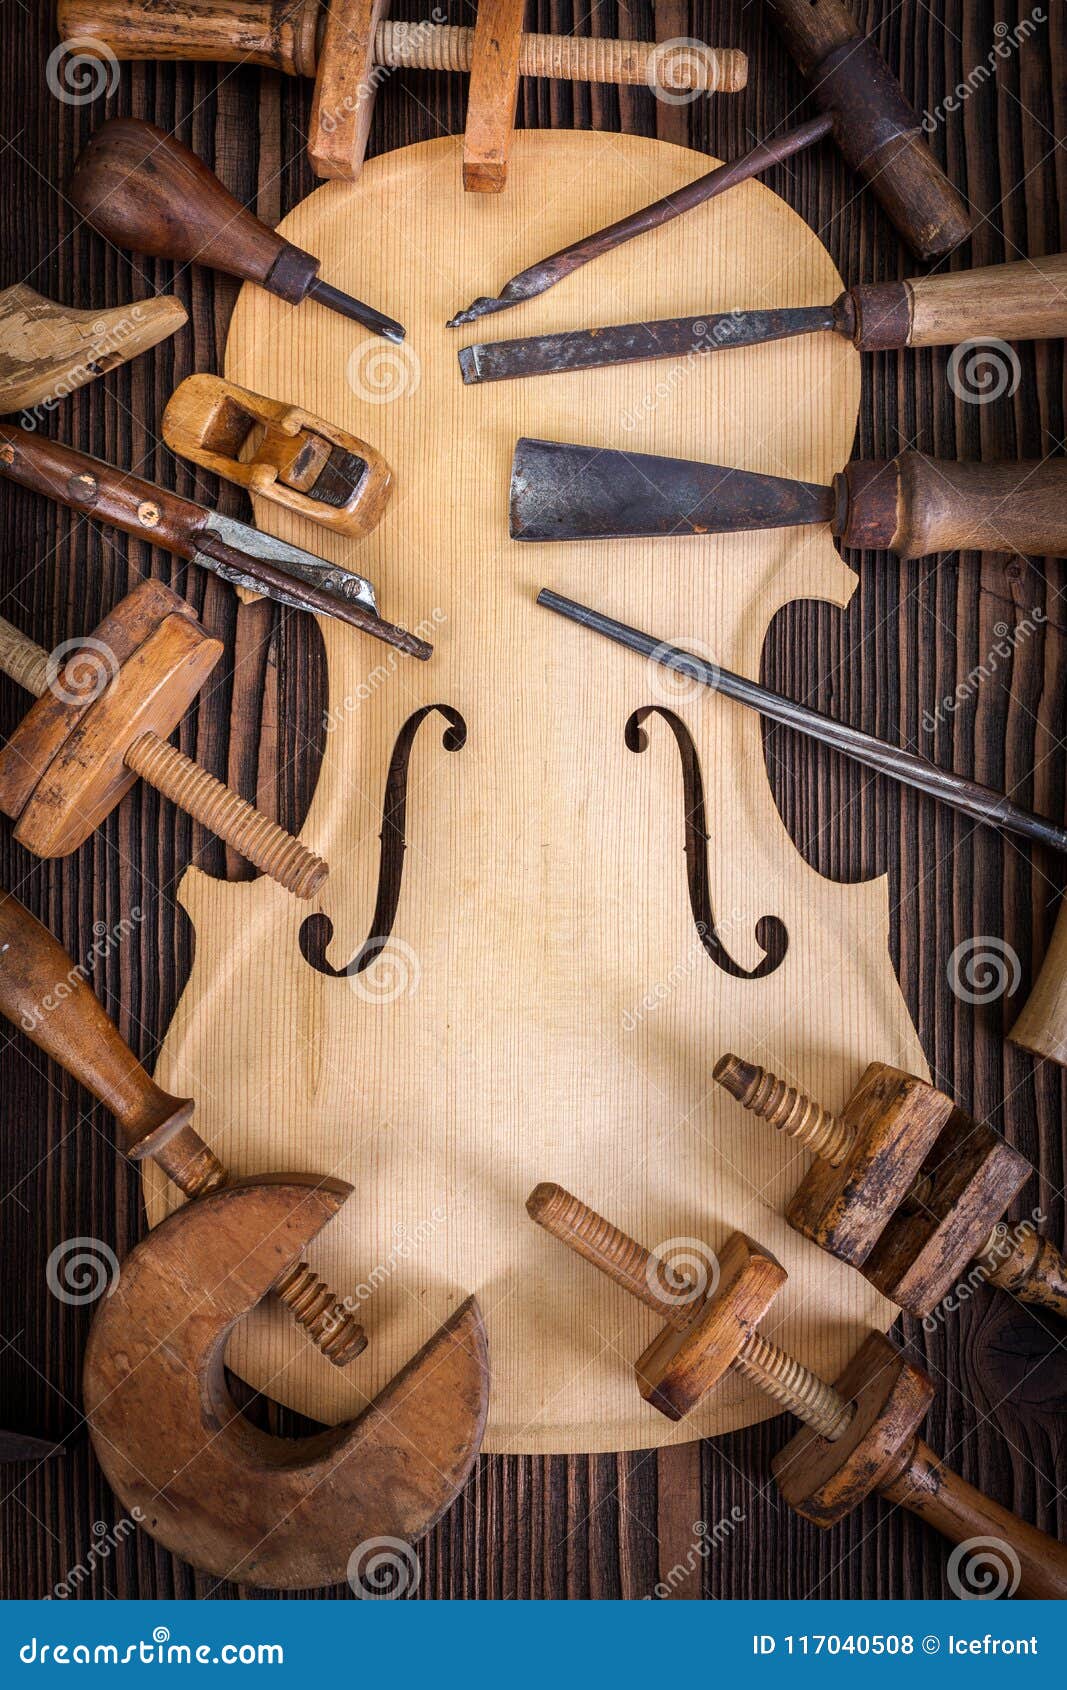 violin belly and work tools